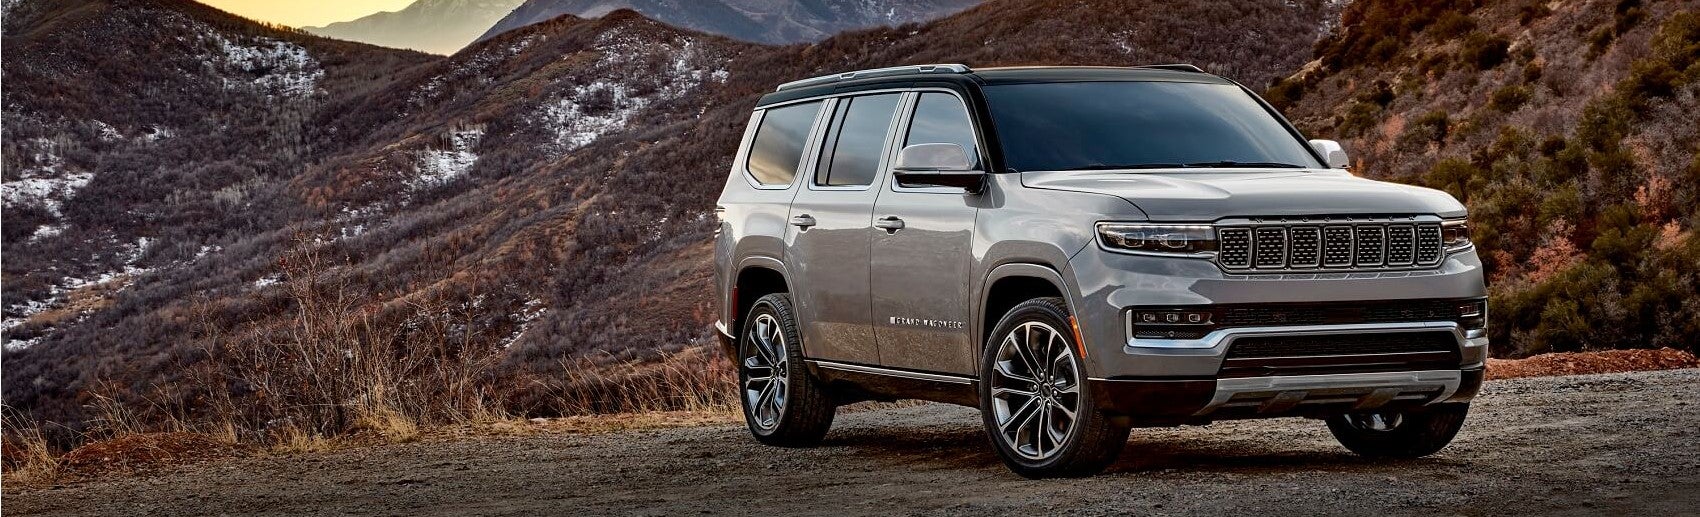 2022 Jeep Grand Wagoneer Silver in Mountains